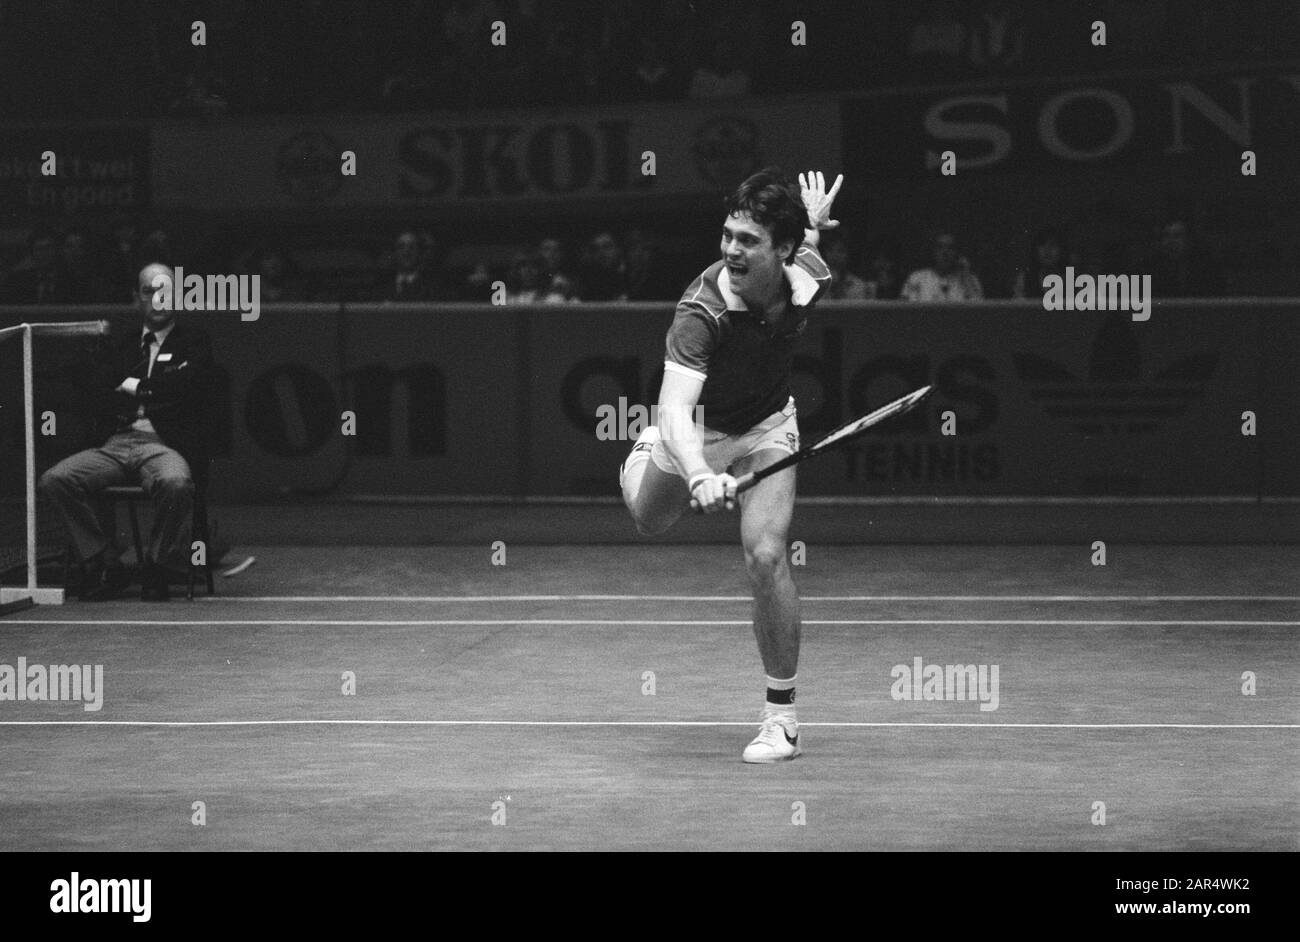 Final world tennis tournament in Ahoy in Rotterdam, Jimmy Connors versus Gene  Mayer. Date: March 22, 1981 Location: Maastricht Keywords: conferences,  hotels Stock Photo - Alamy